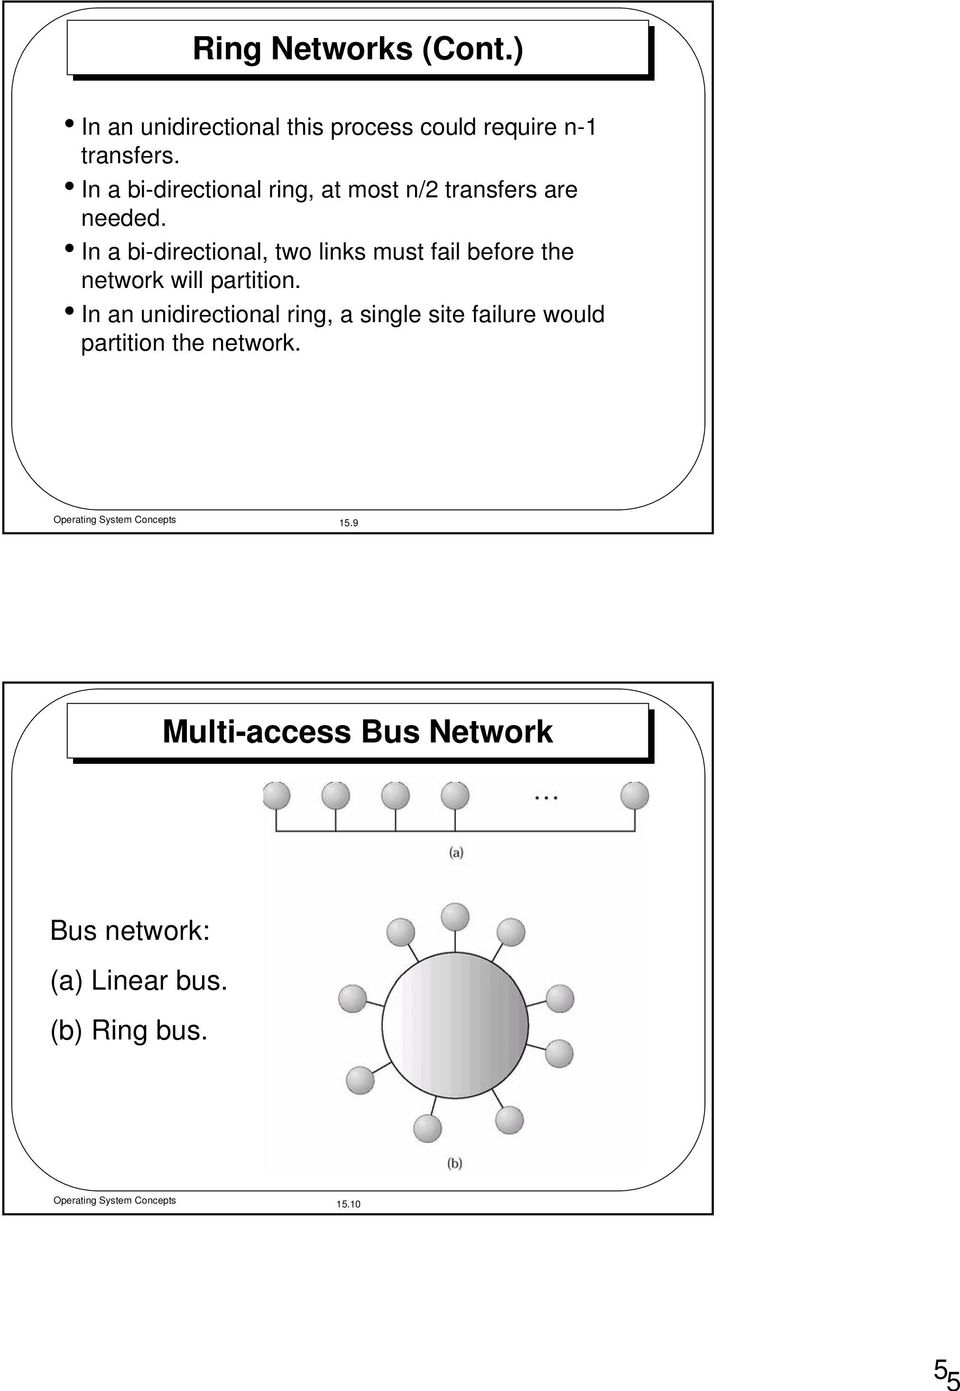 In a bi-directional, two links must fail before the network will partition.